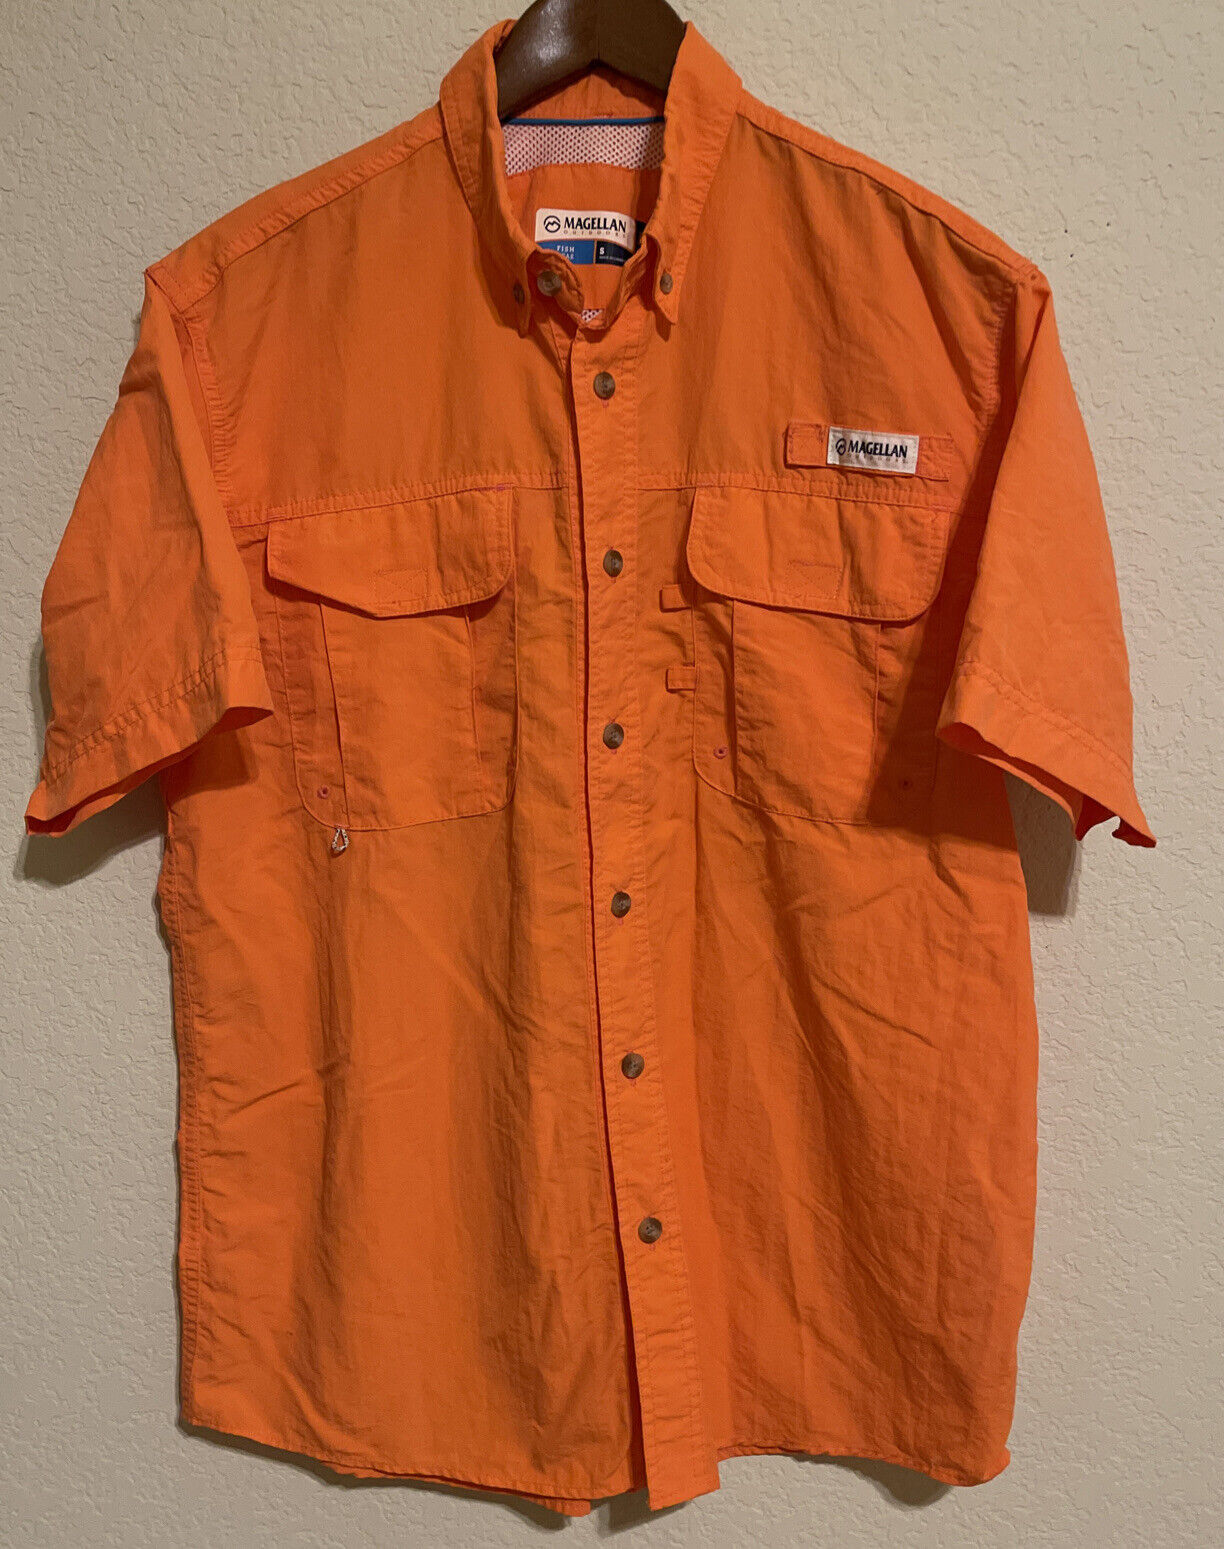 Magellan Our shop OFFers the best service MagWick Fish Gear Fishing Shirt Back~ Fresno Mall Vented Men w Size